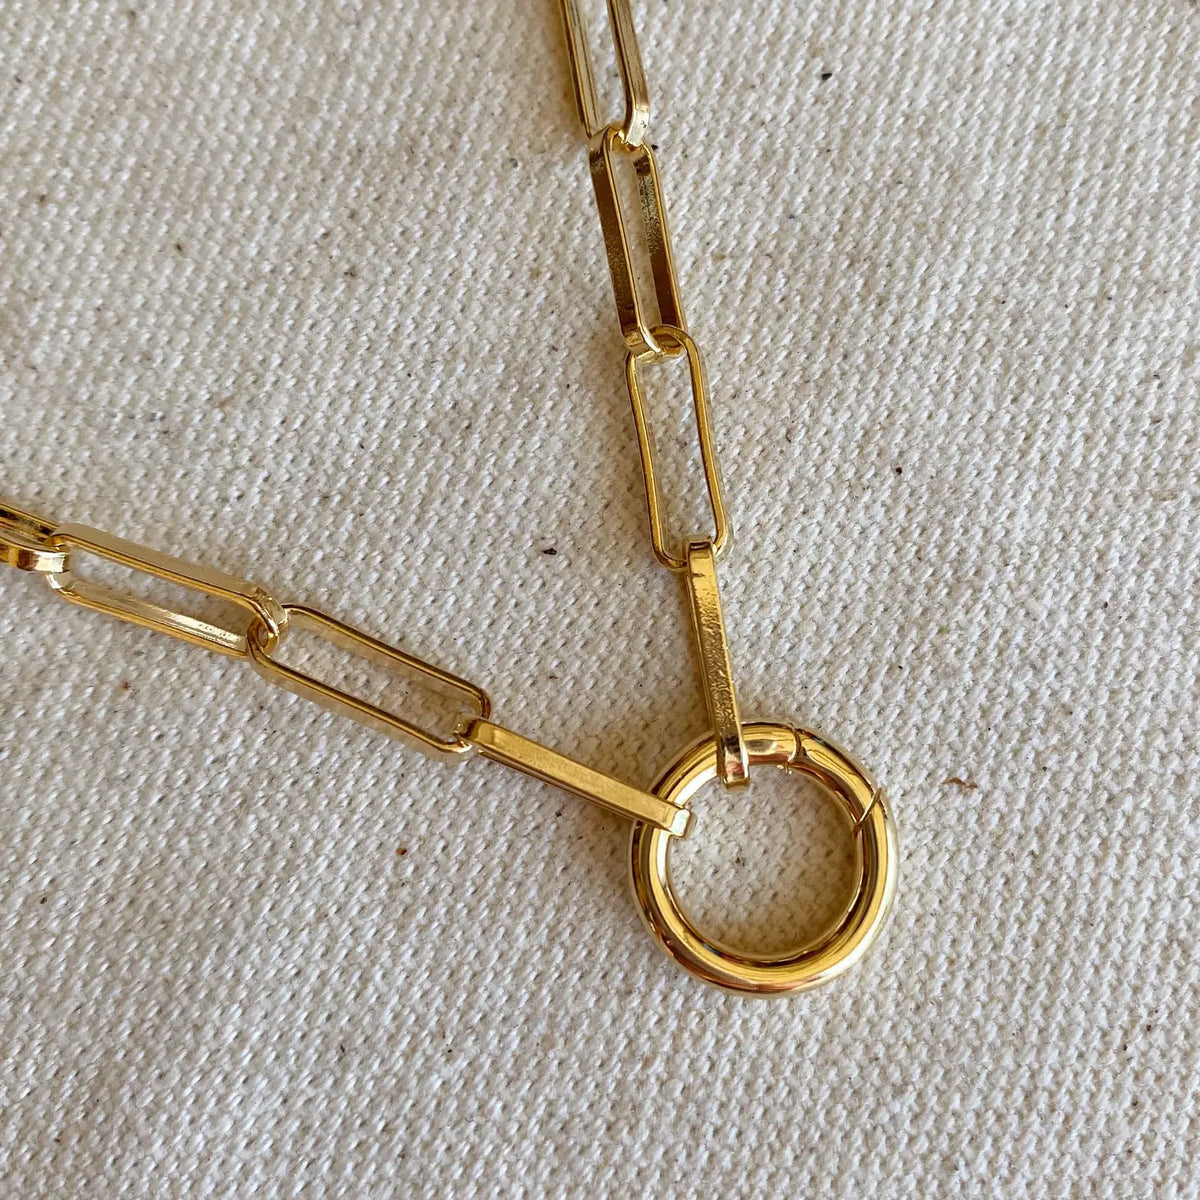 Chunky 18k Gold Filled Paperclip Chain With Charm Clip